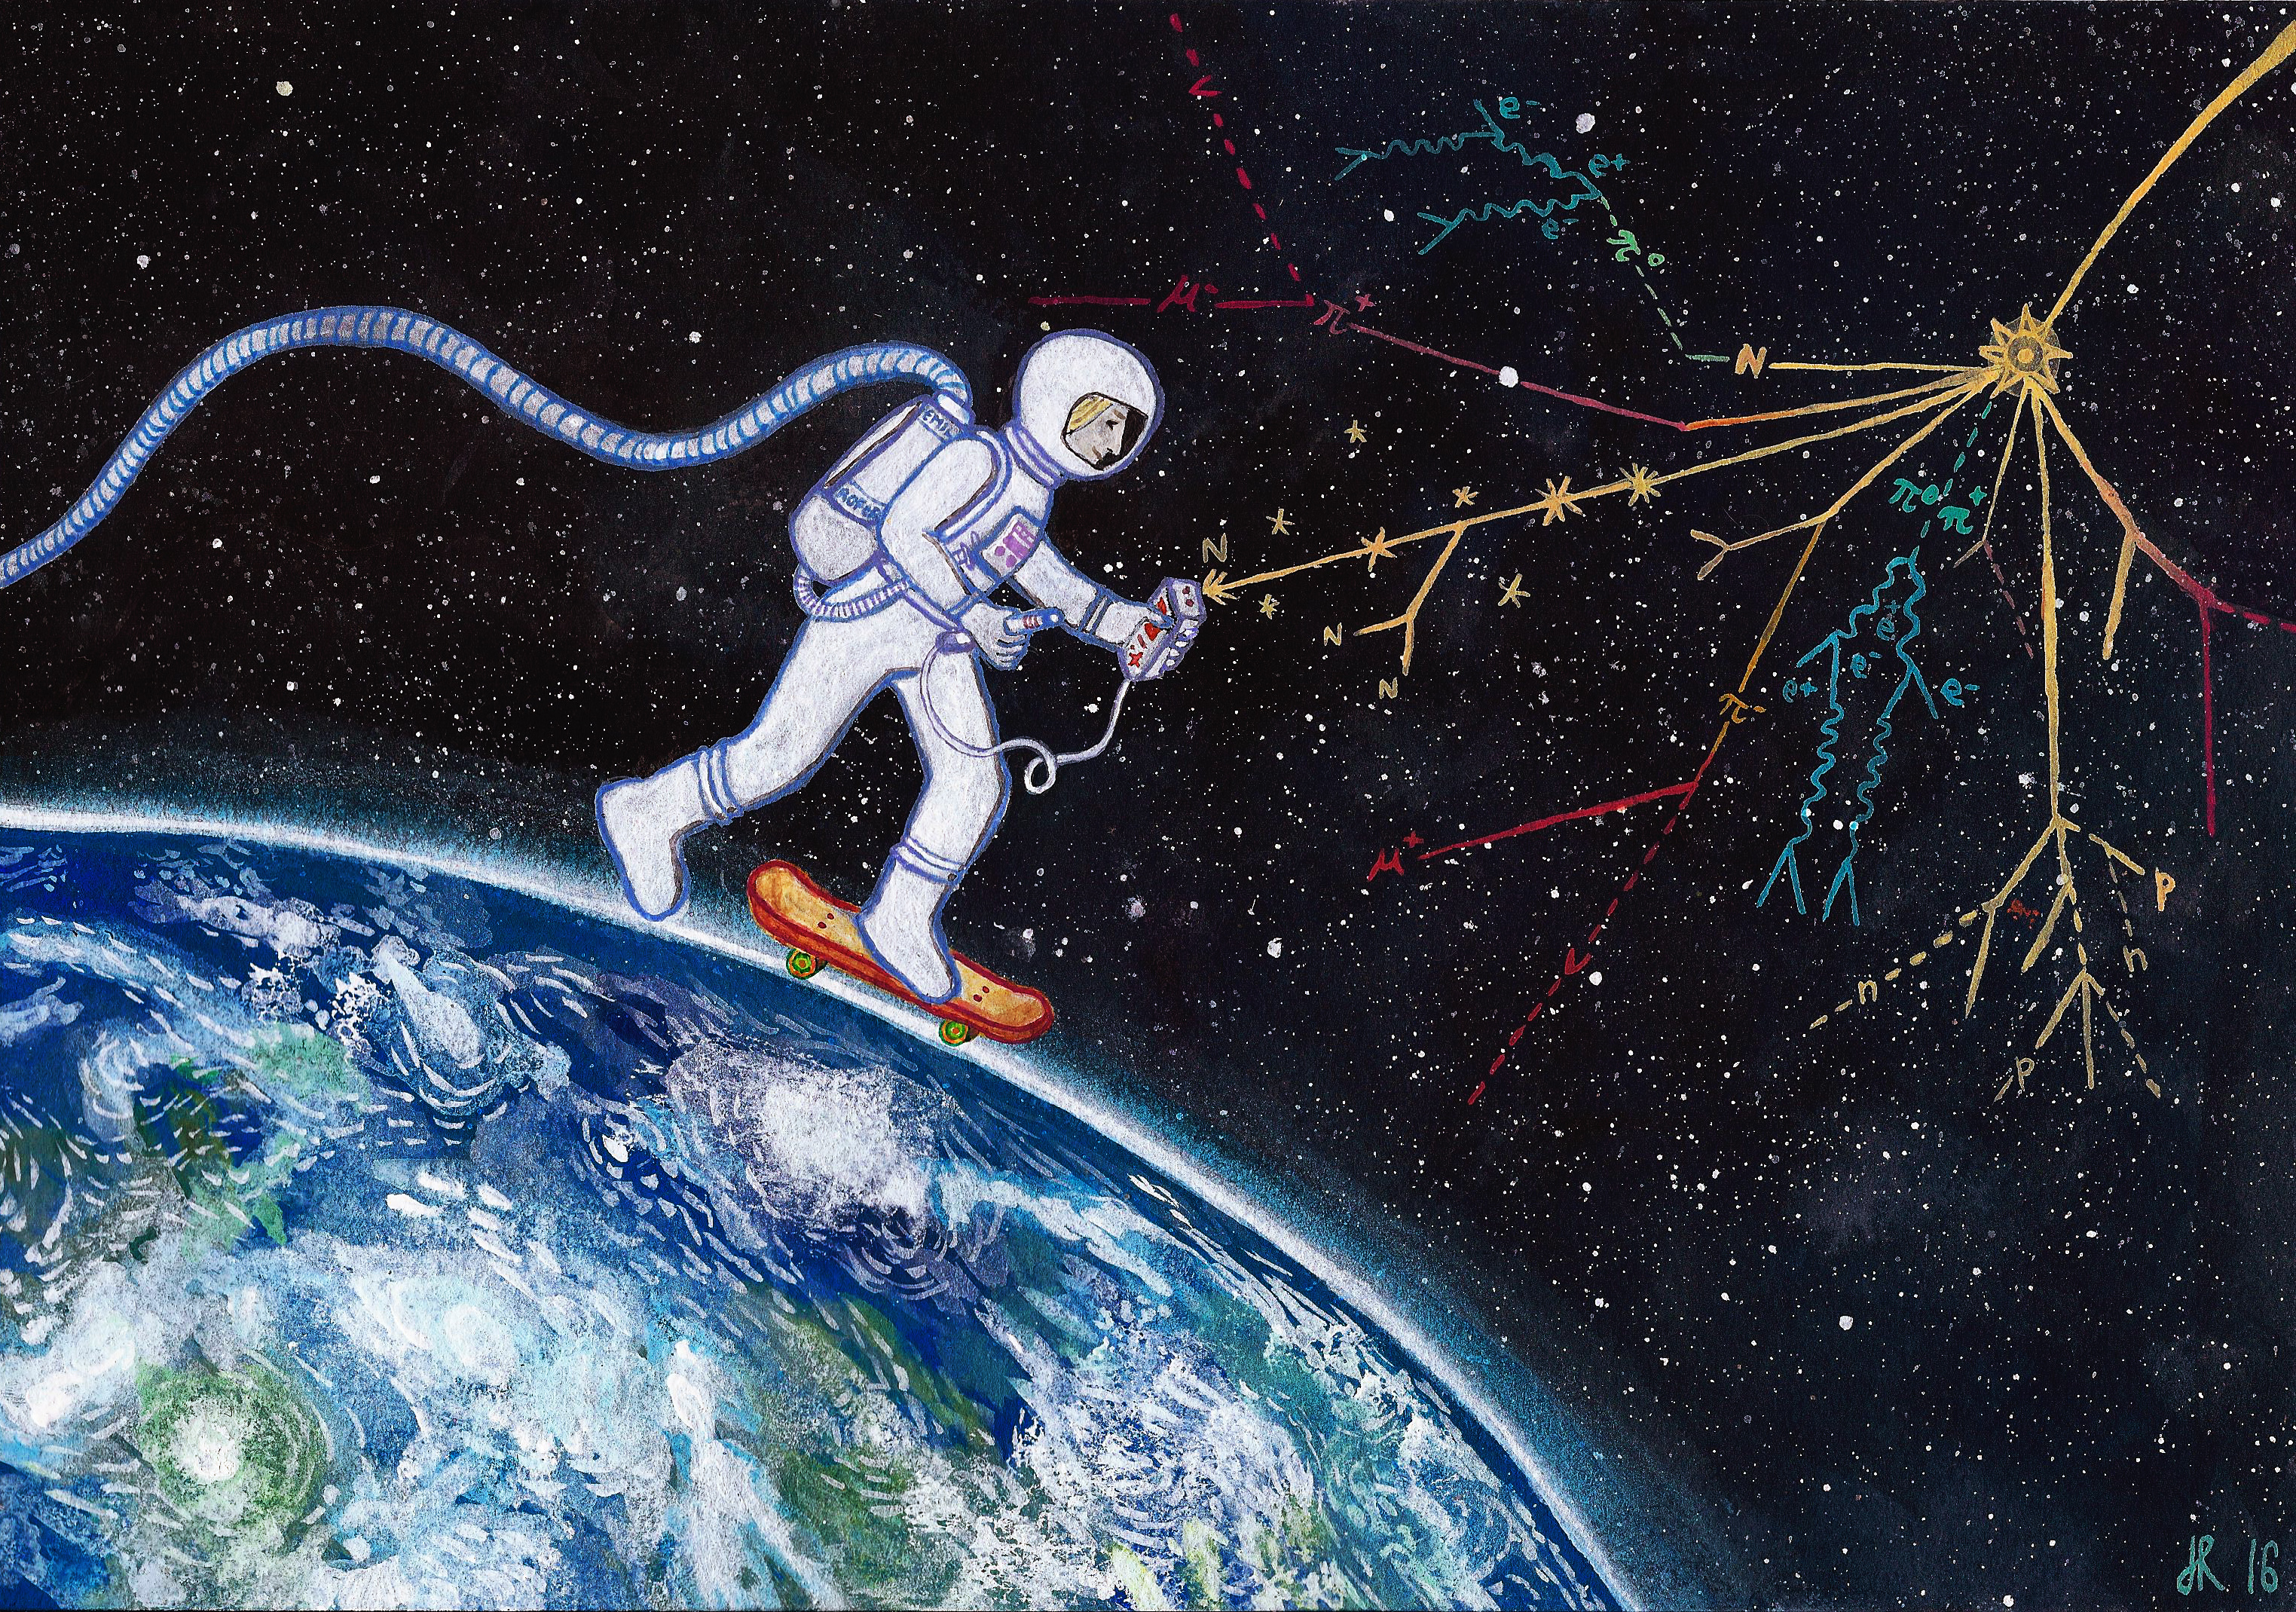 painting of a programmer skating the earth